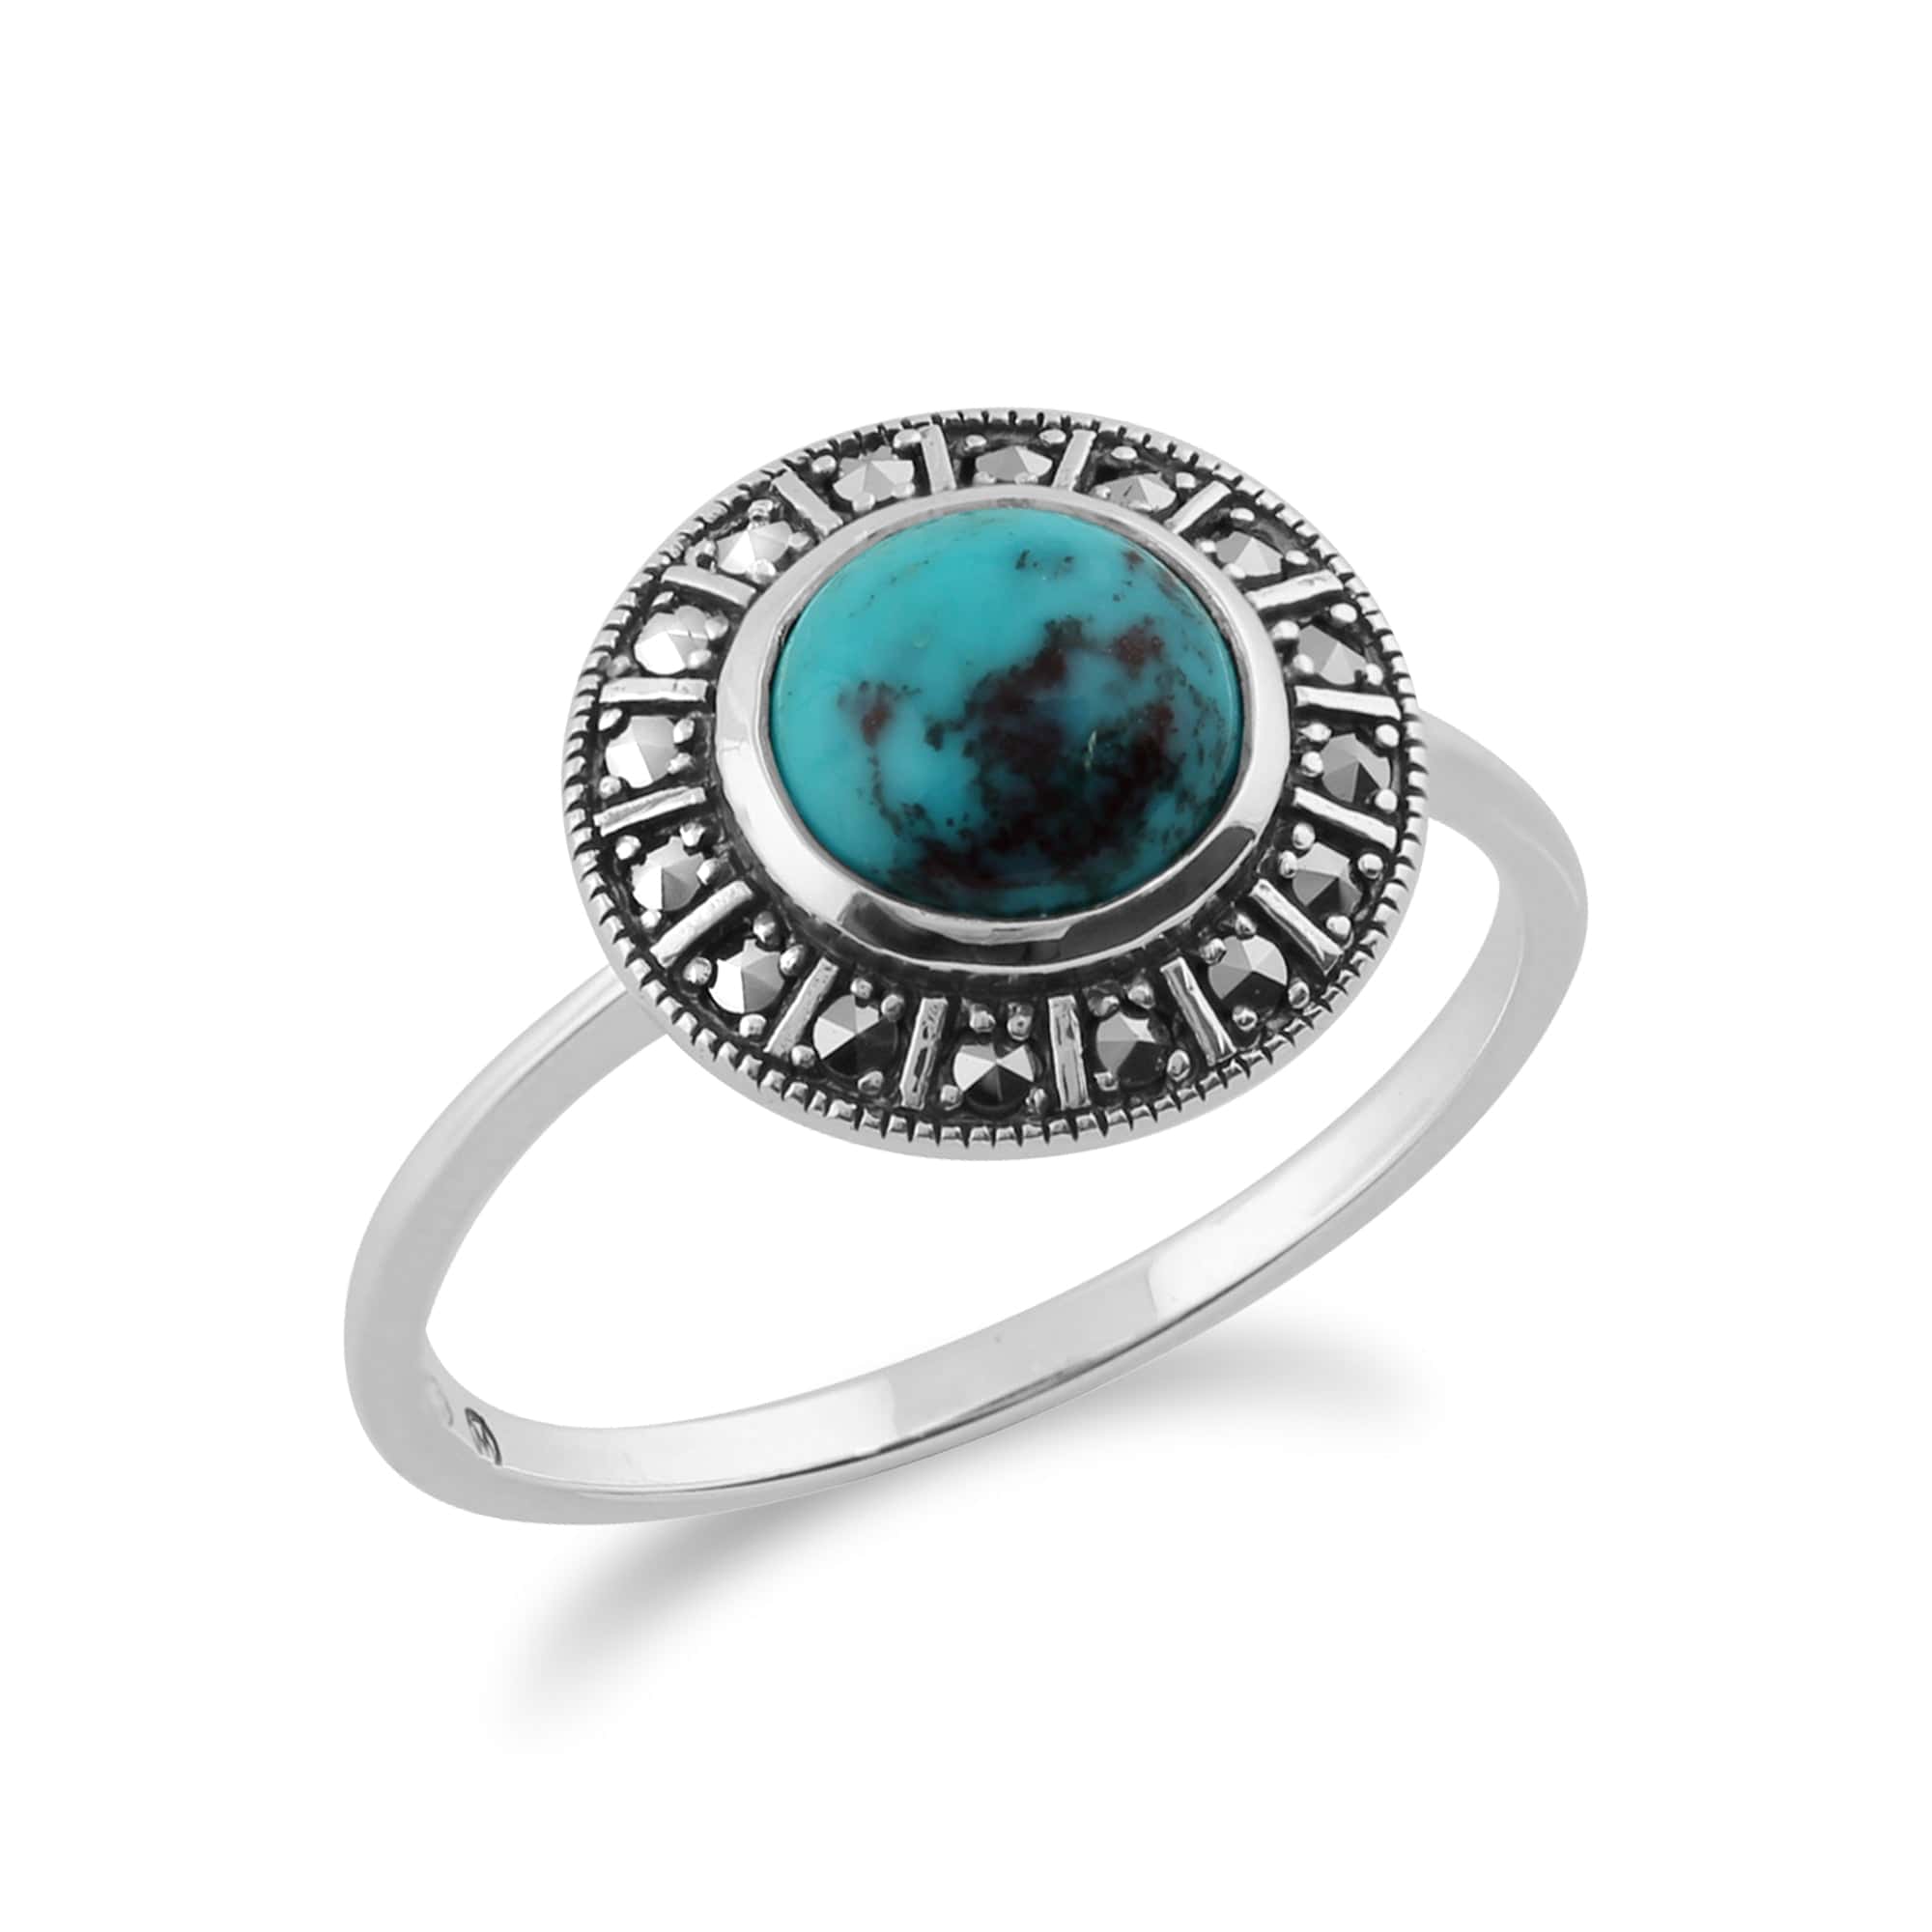 214R513413925 Art Deco Style Round Turquoise Cabochon & Marcasite Halo Ring in 925 Sterling Silver 2